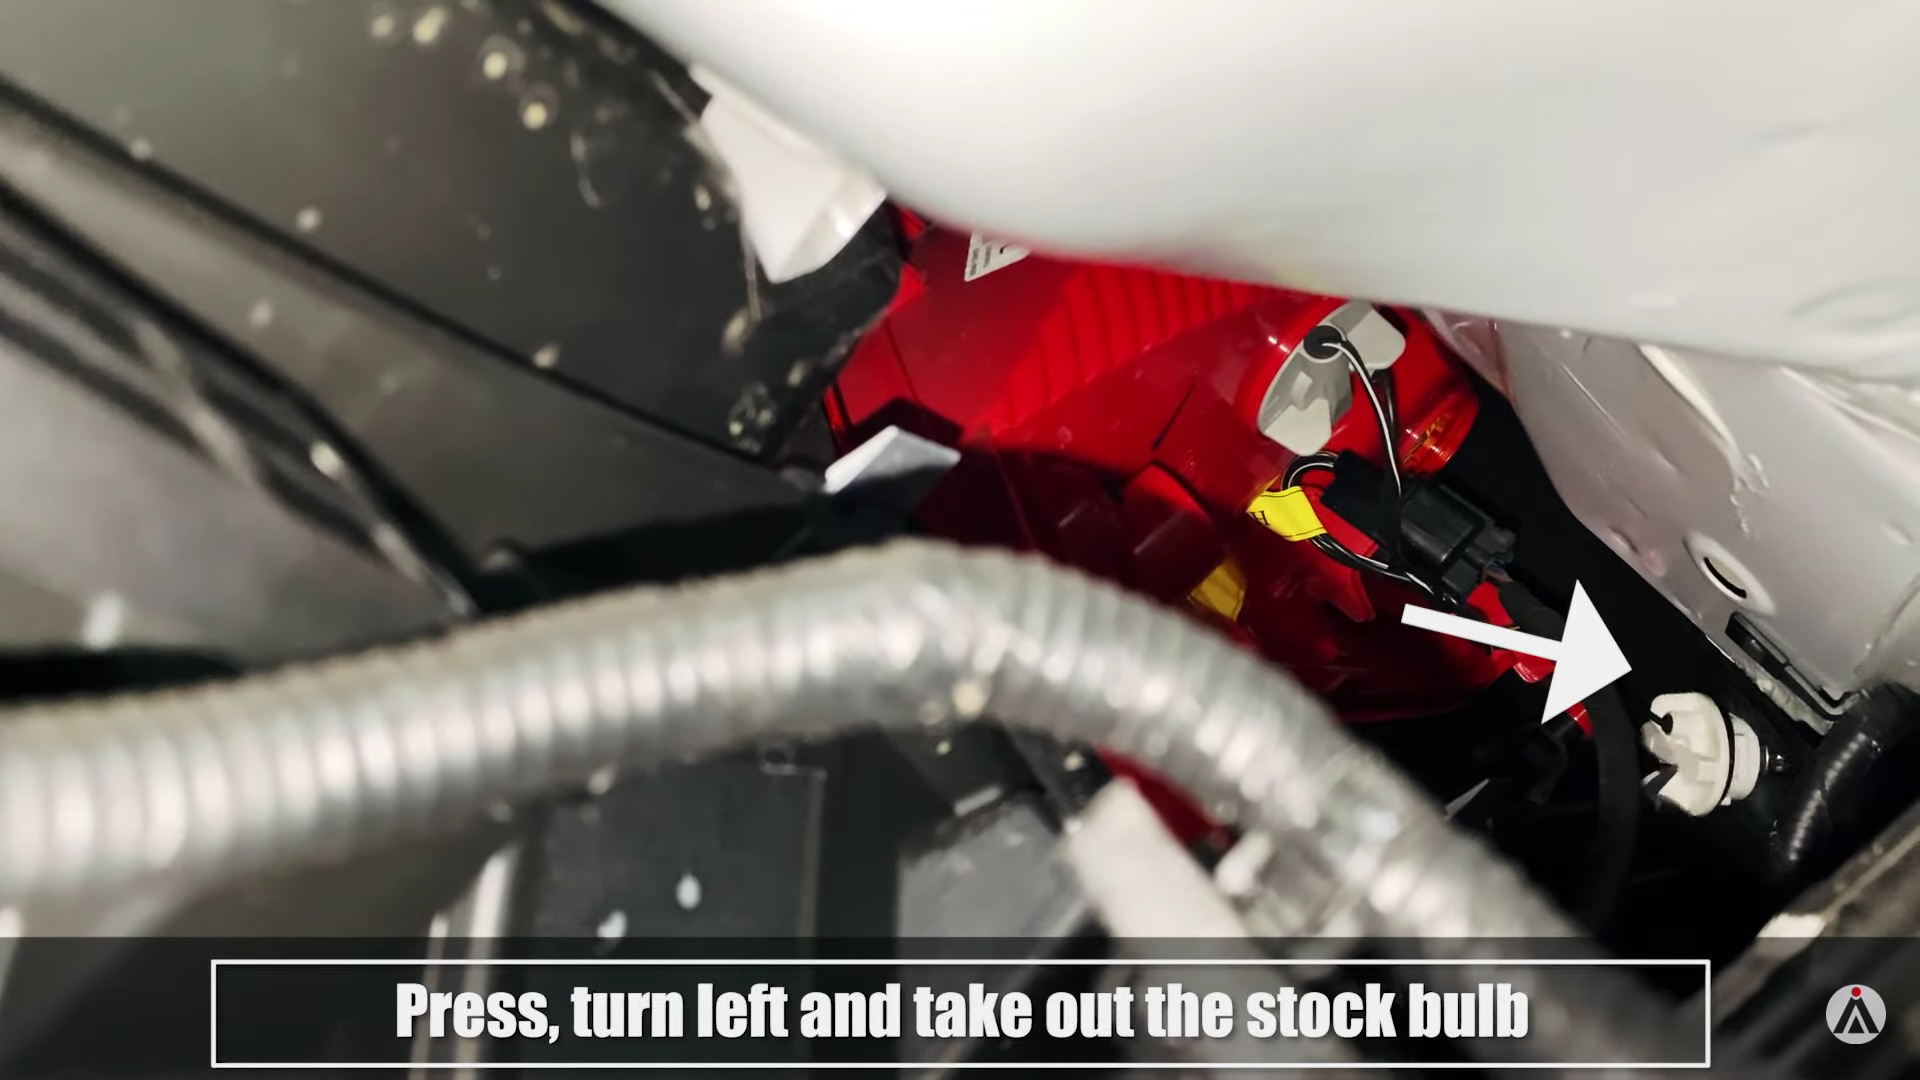 Press, turn left and take out the stock bulb